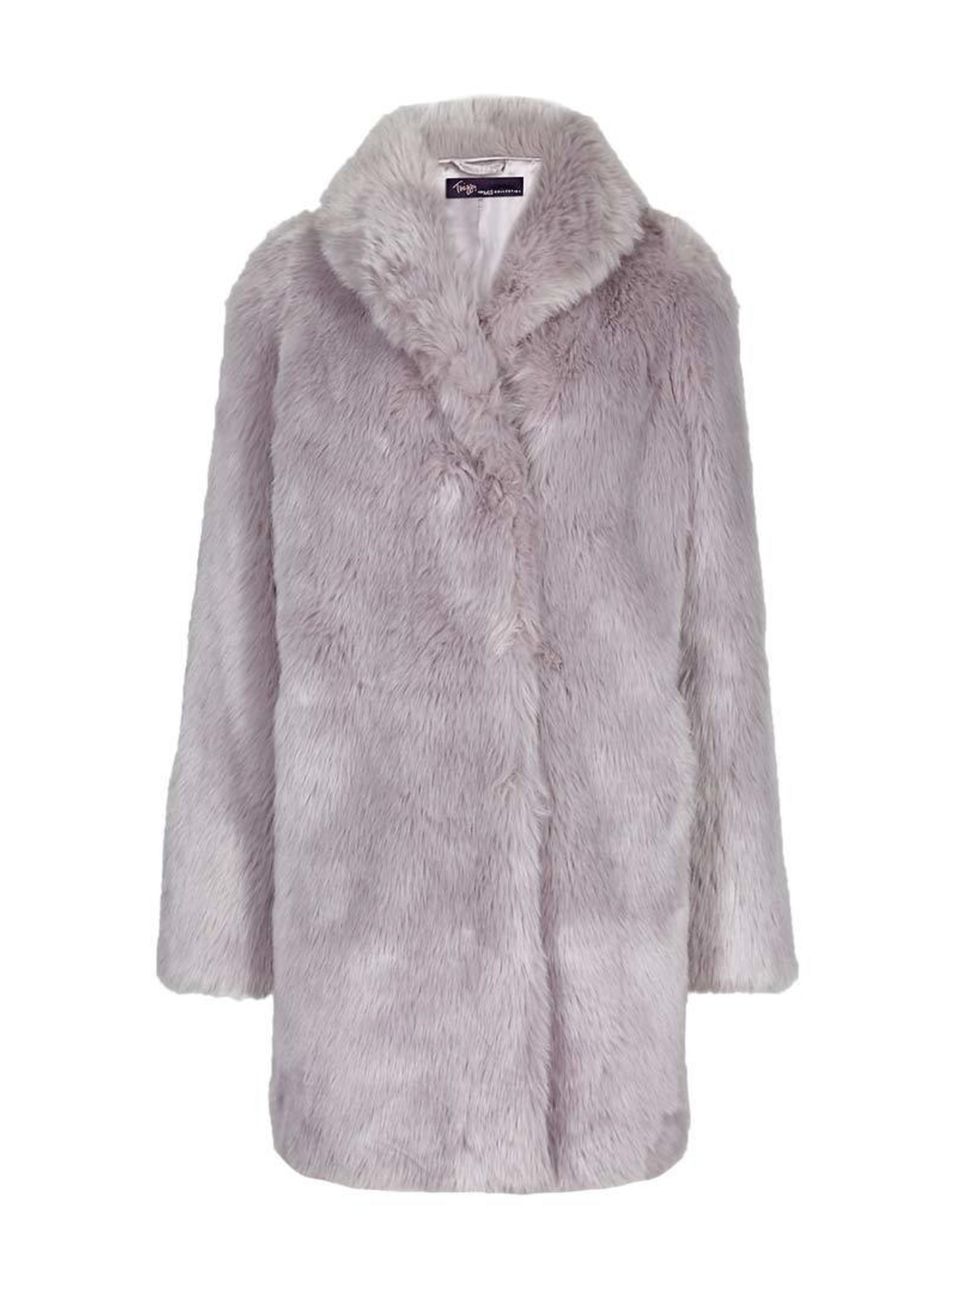 <p><a href="http://www.marksandspencer.com/faux-fur-coat/p/p22341312#" target="_blank">Twiggy for Marks & Spencer</a> coat, £99.00</p>